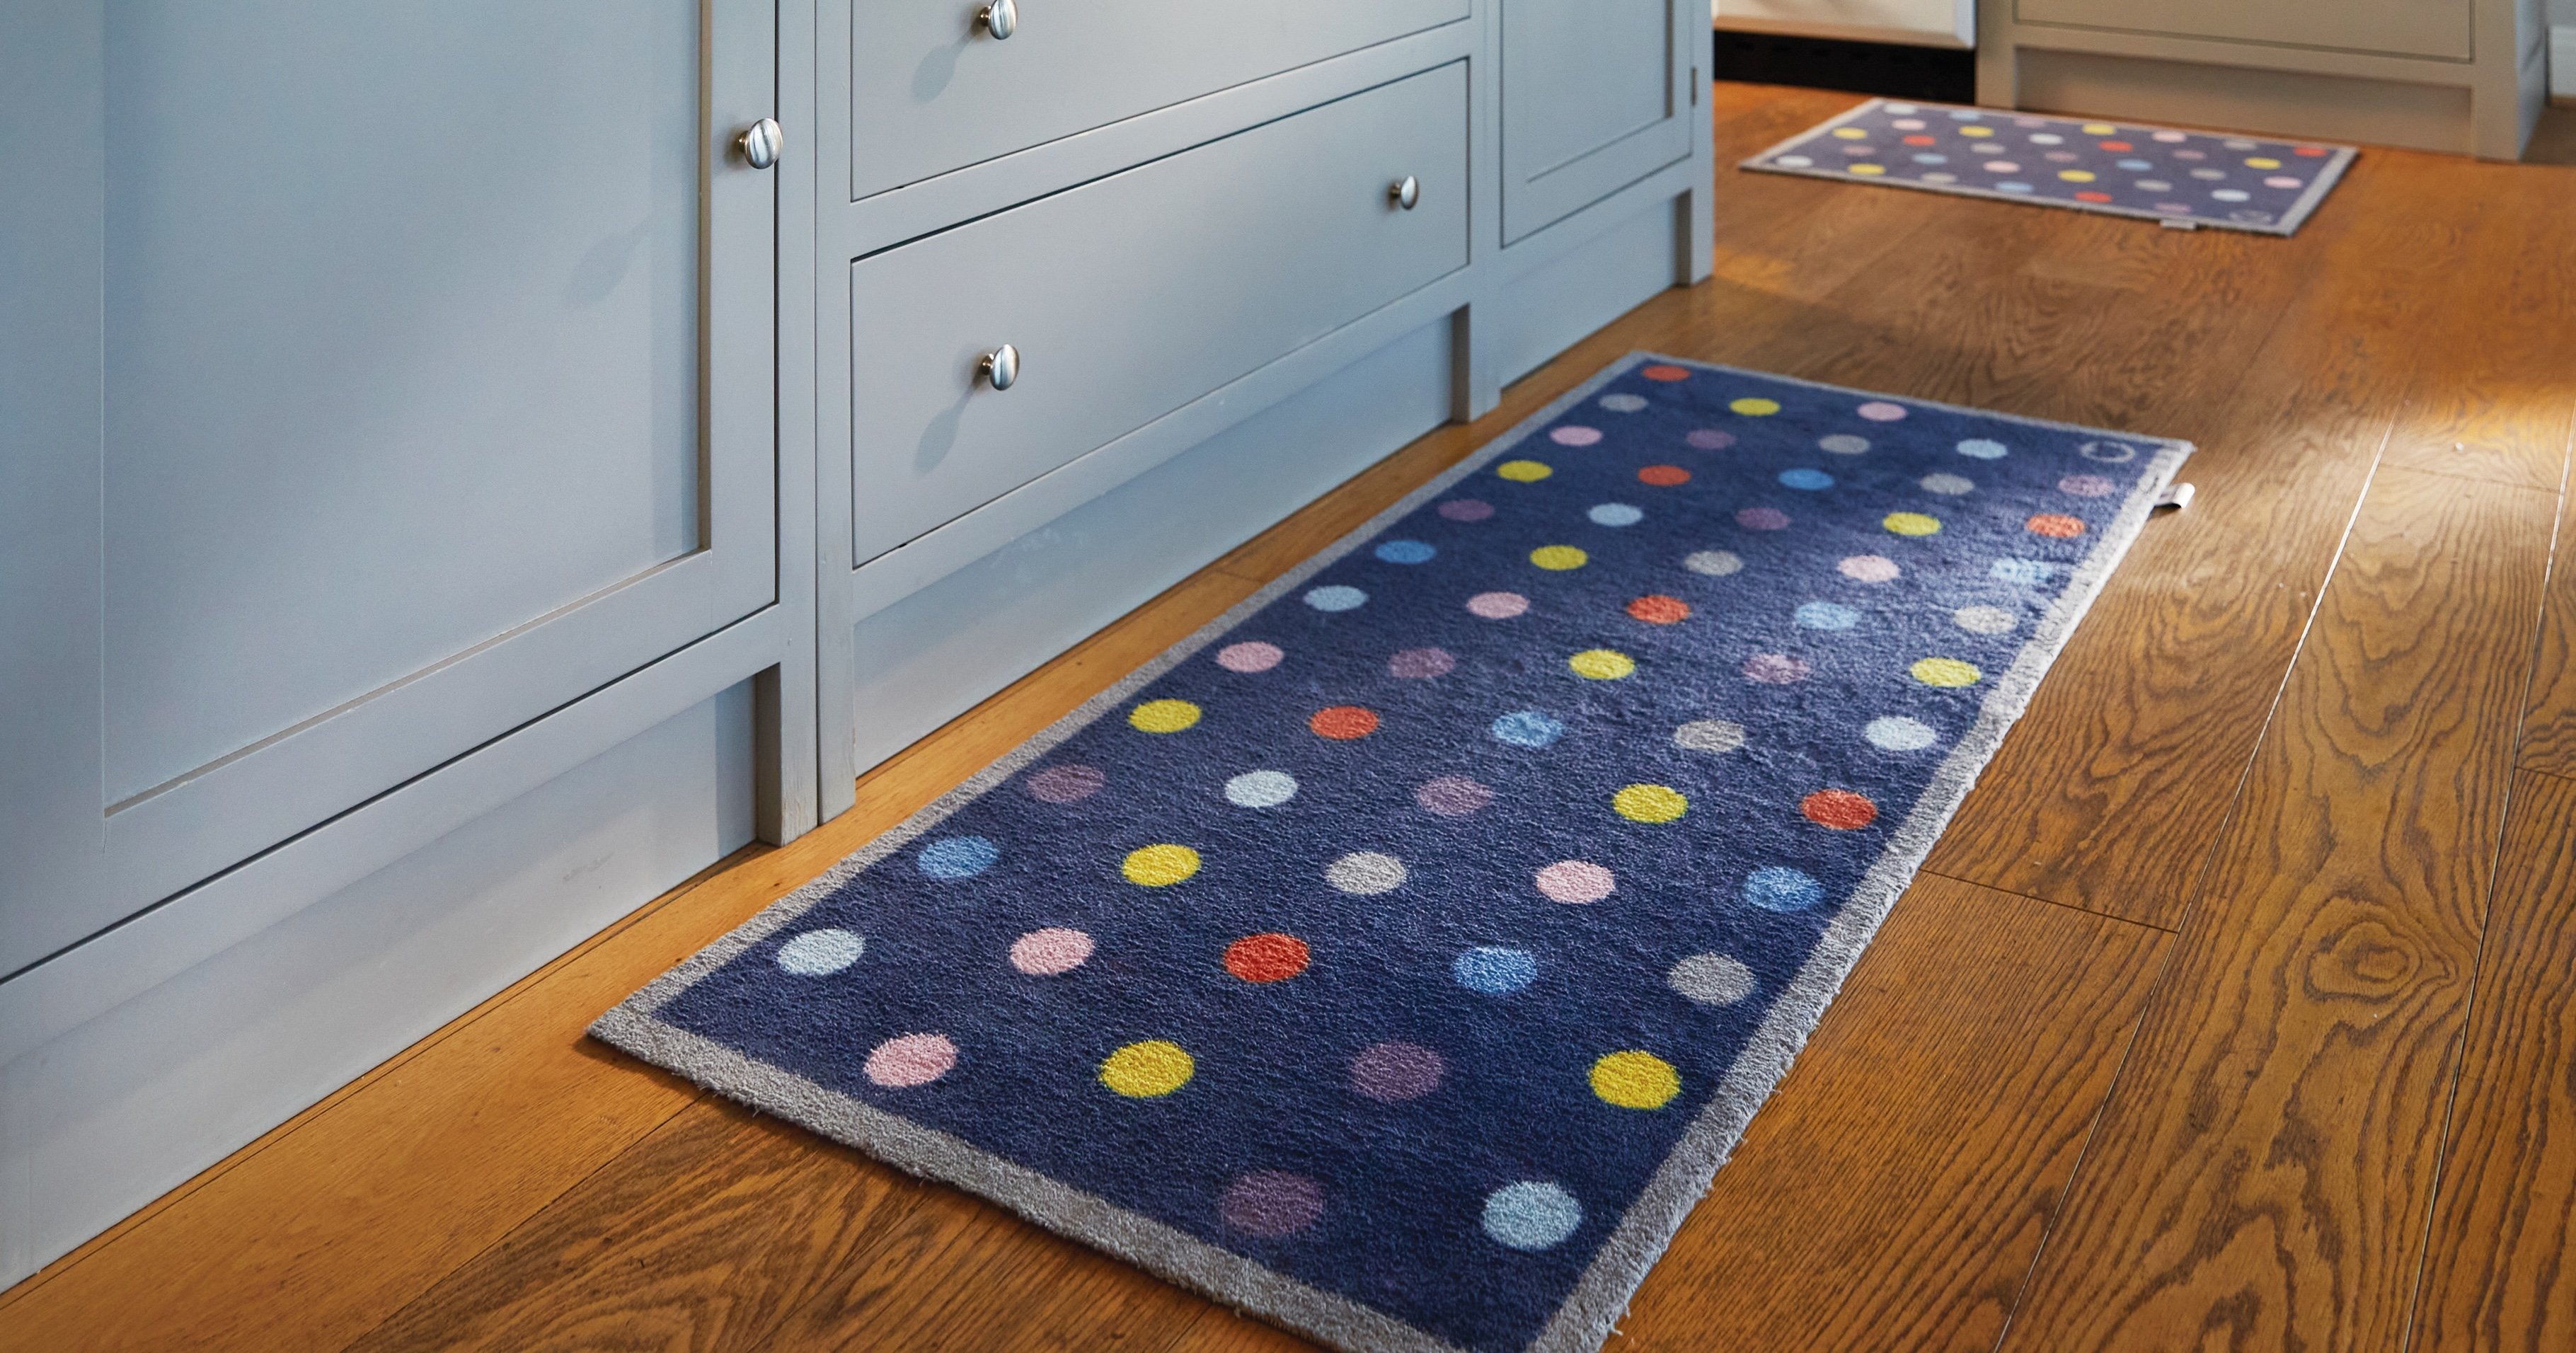 A bright spotted kitchen runner on a kitchen floor